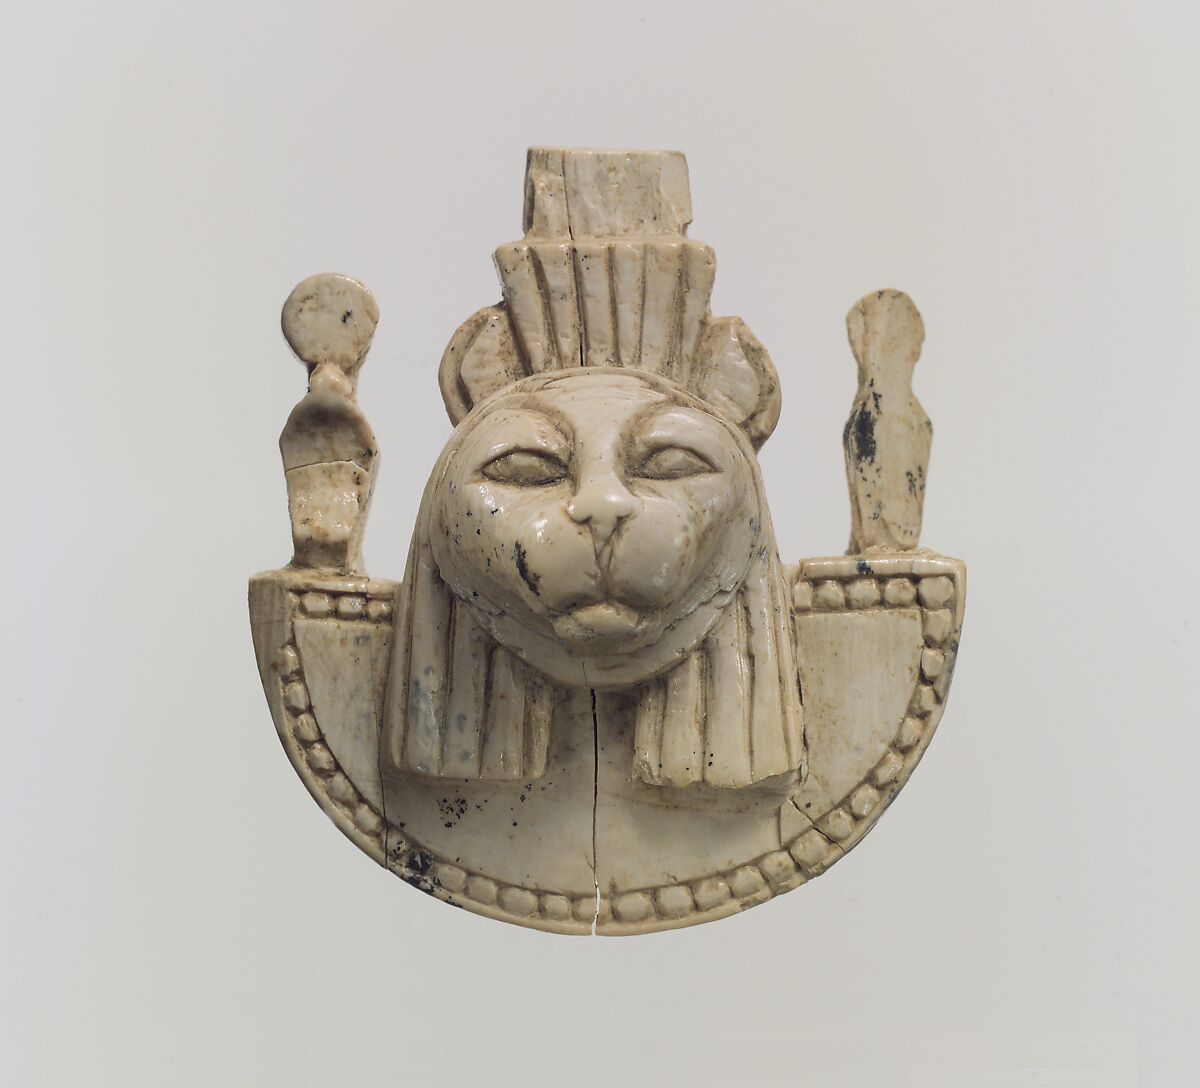 Openwork furniture plaque with the head of a feline, Ivory, Assyrian